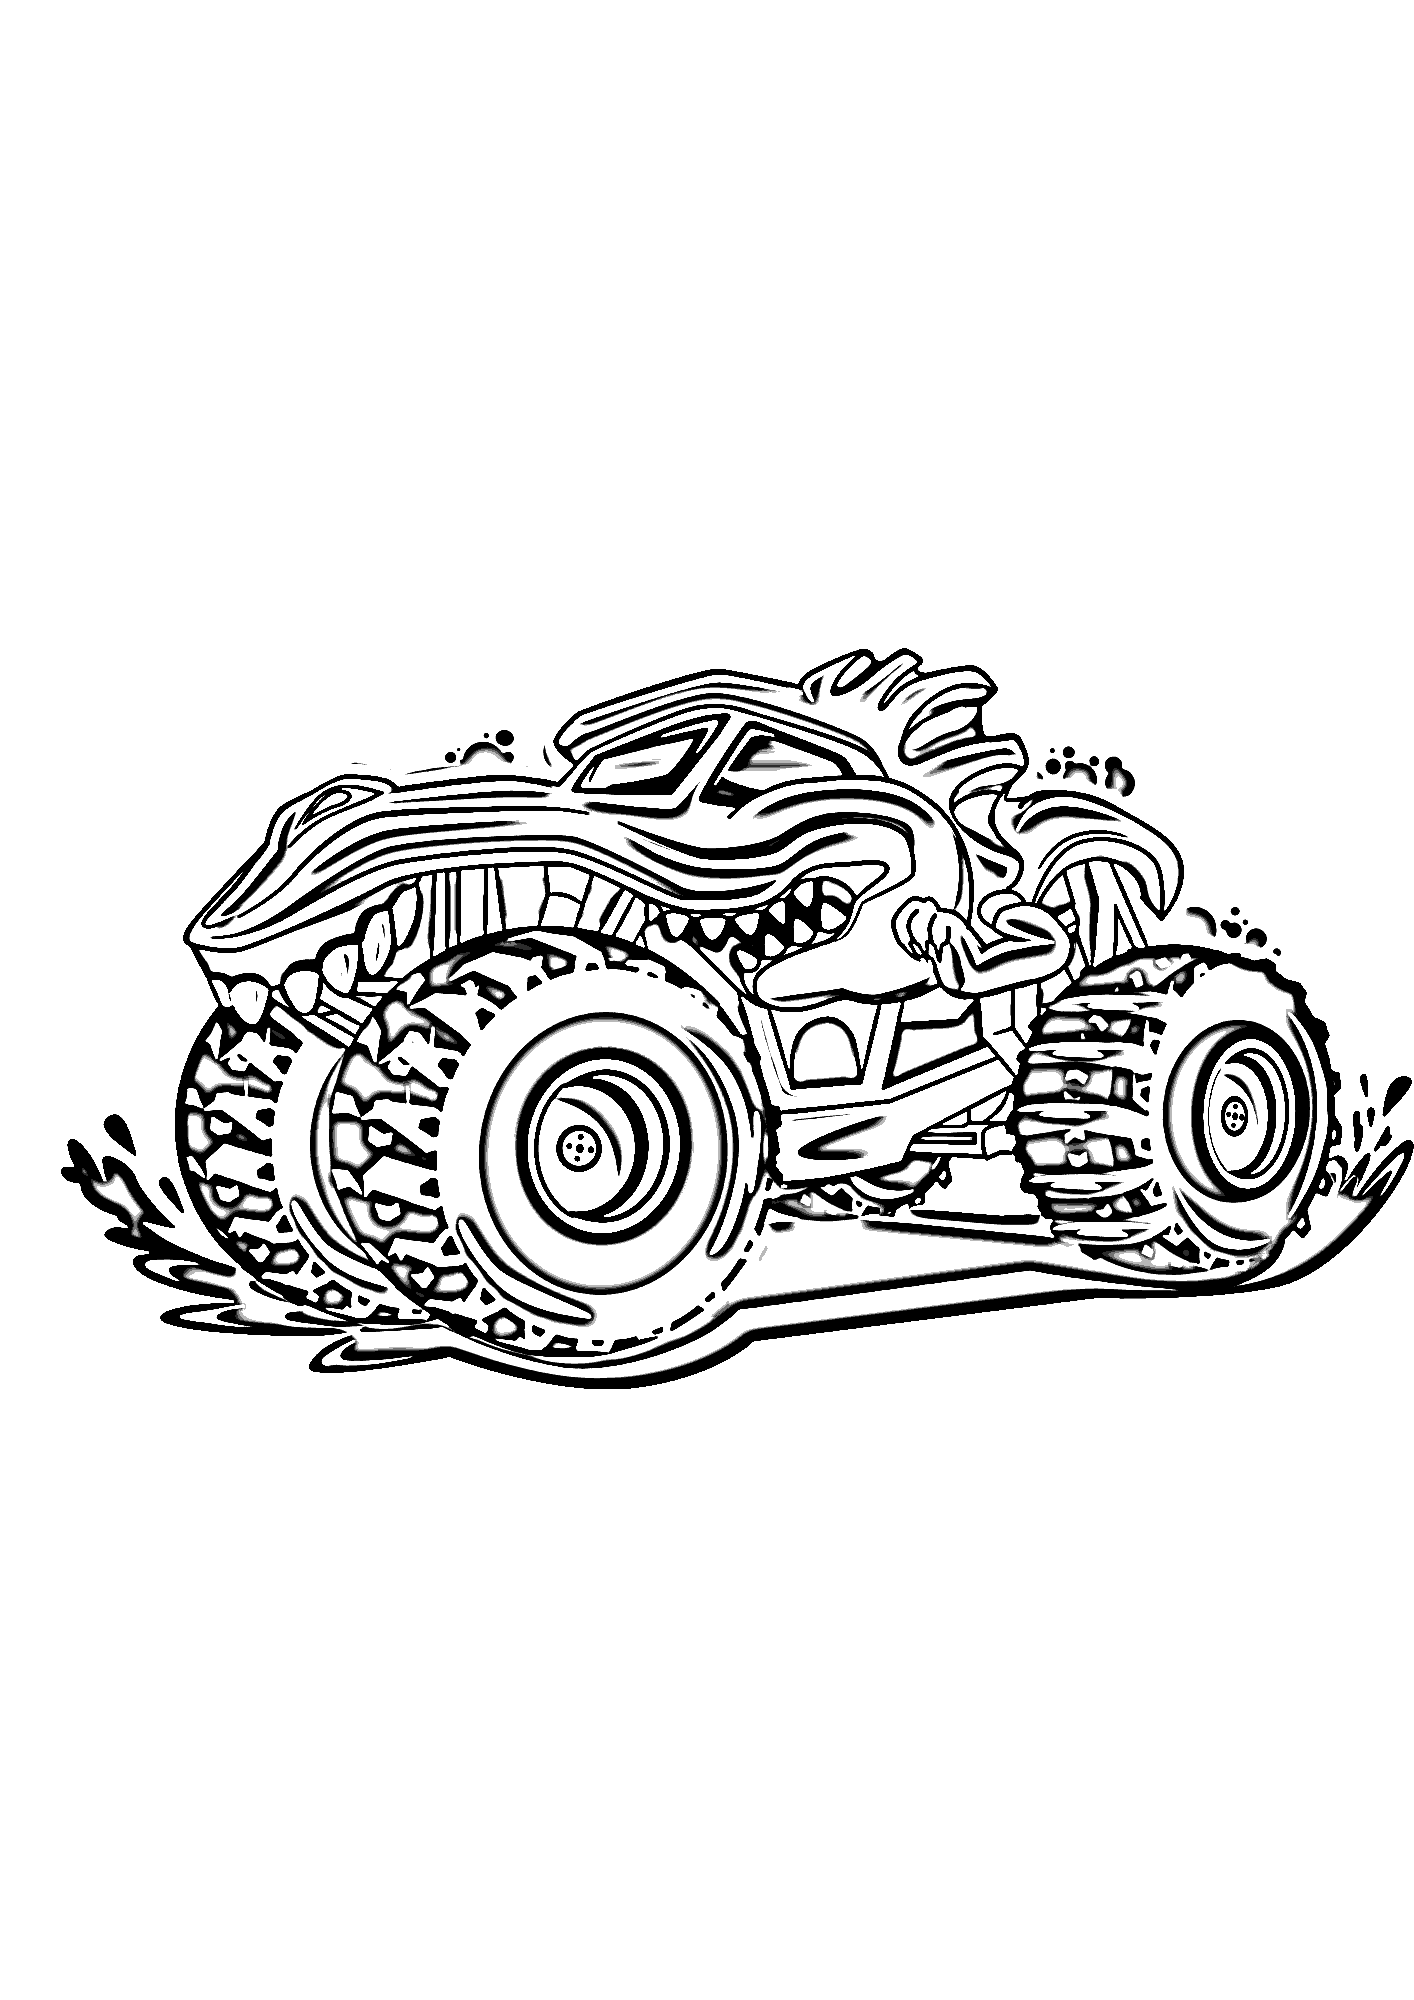 Monster Truck Image Coloring pages